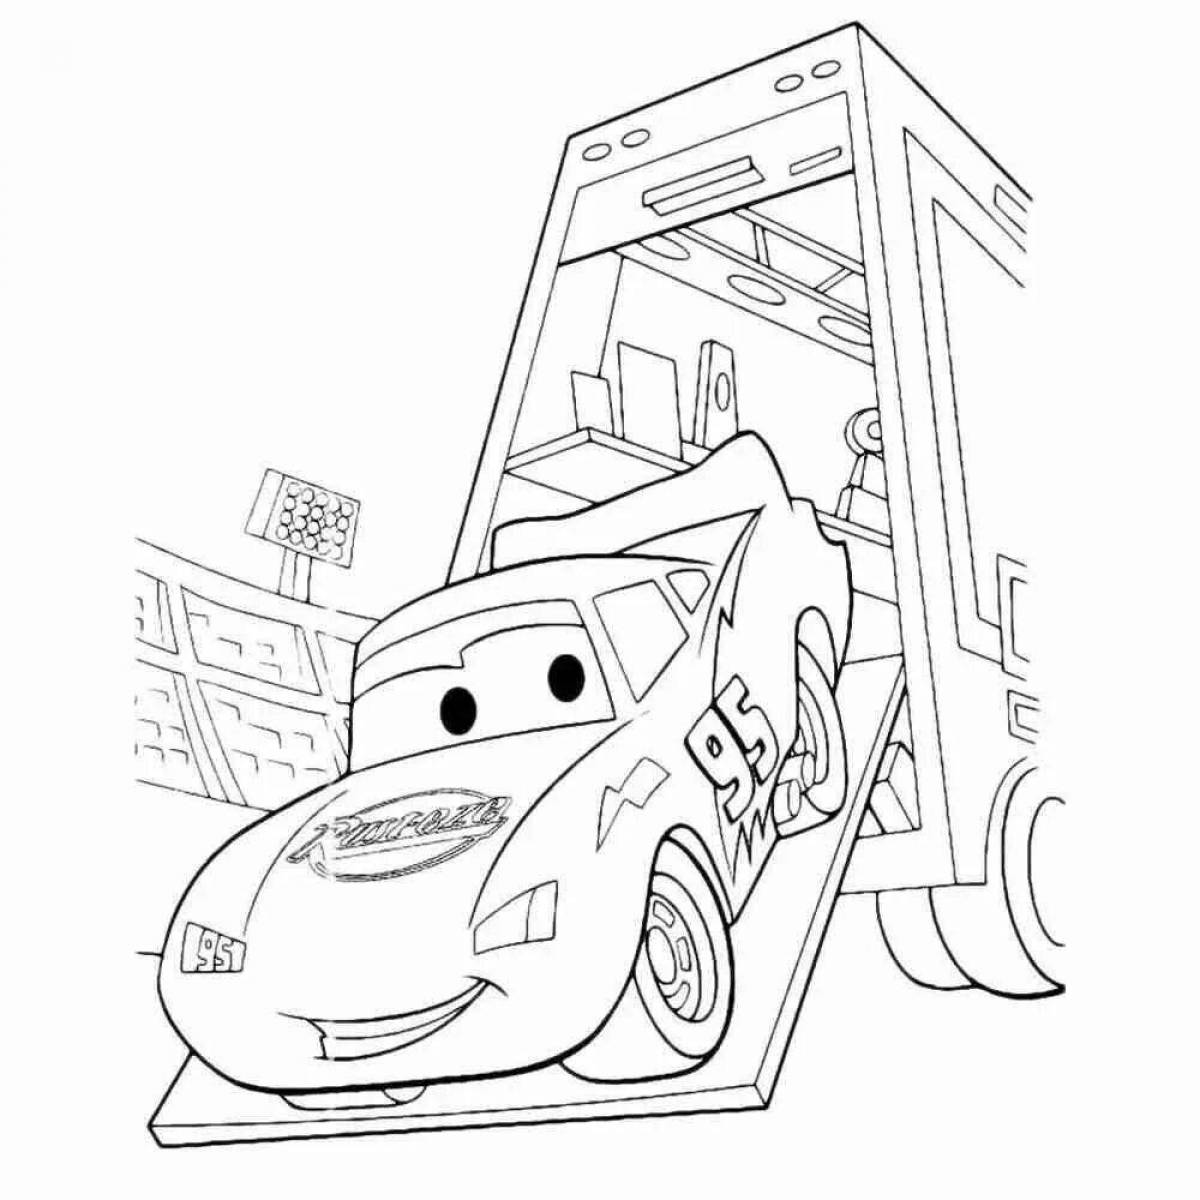 Coloring page glamor fast cars